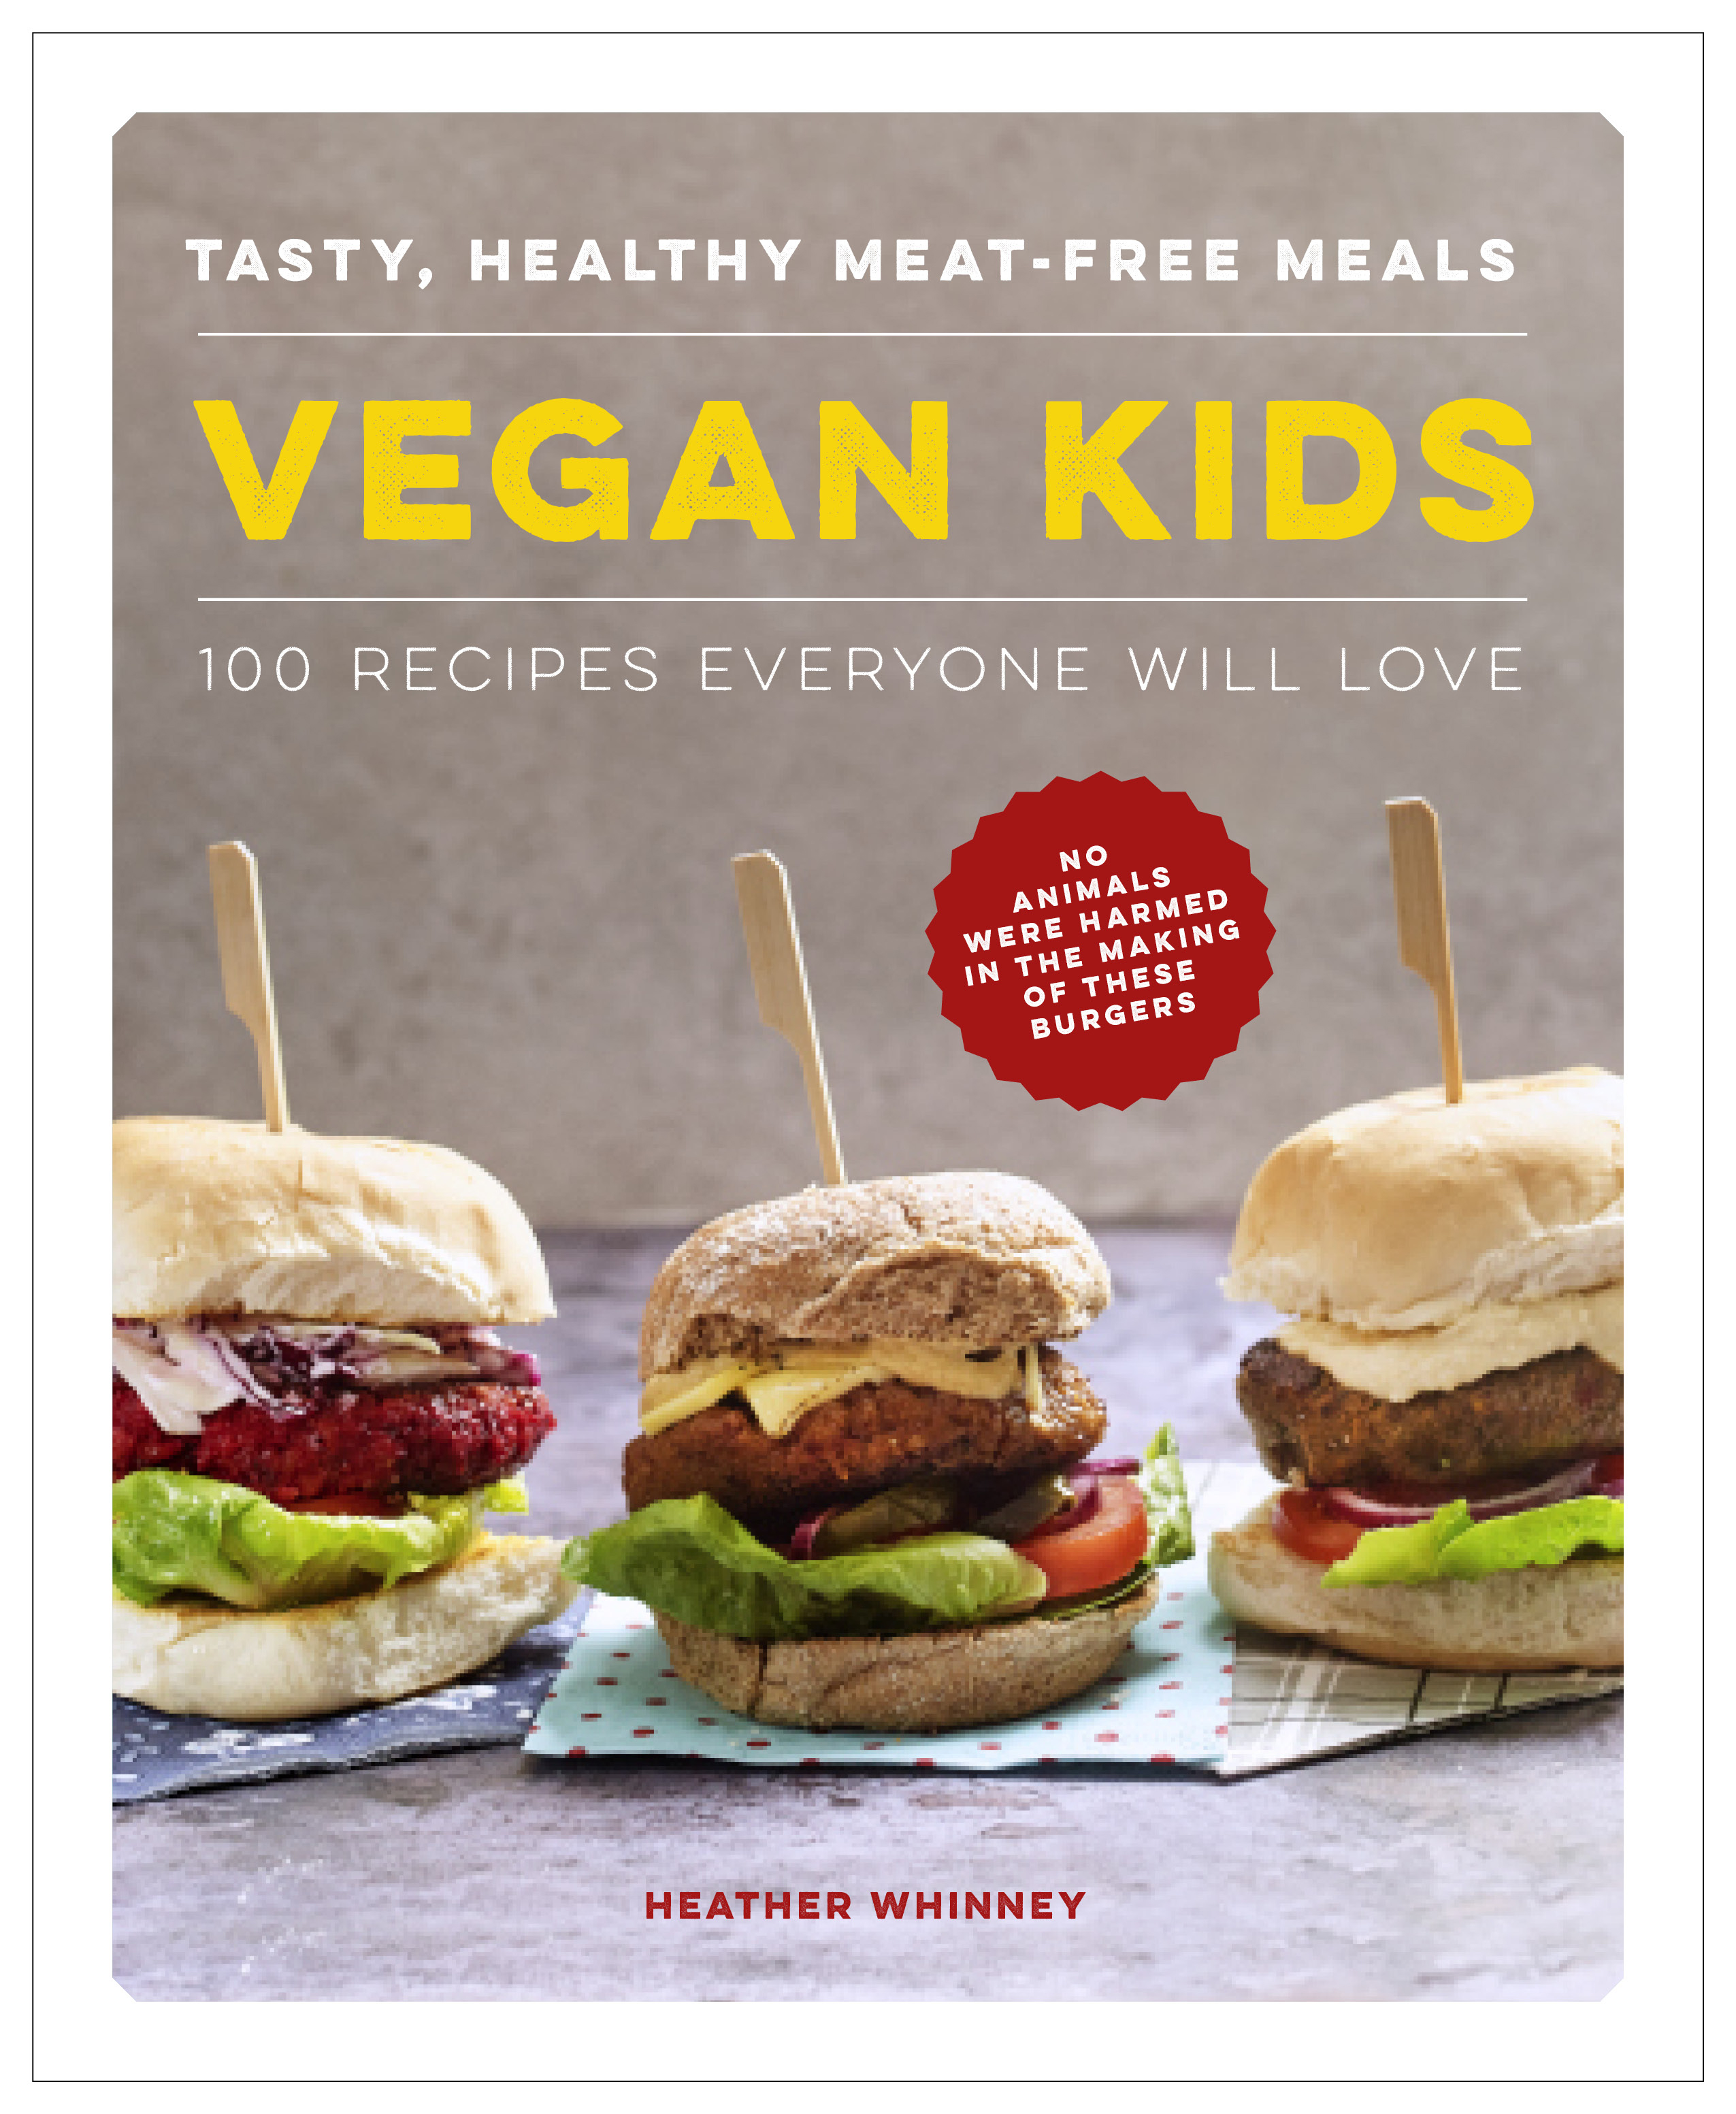 Vegan Kids by Heather Whinney